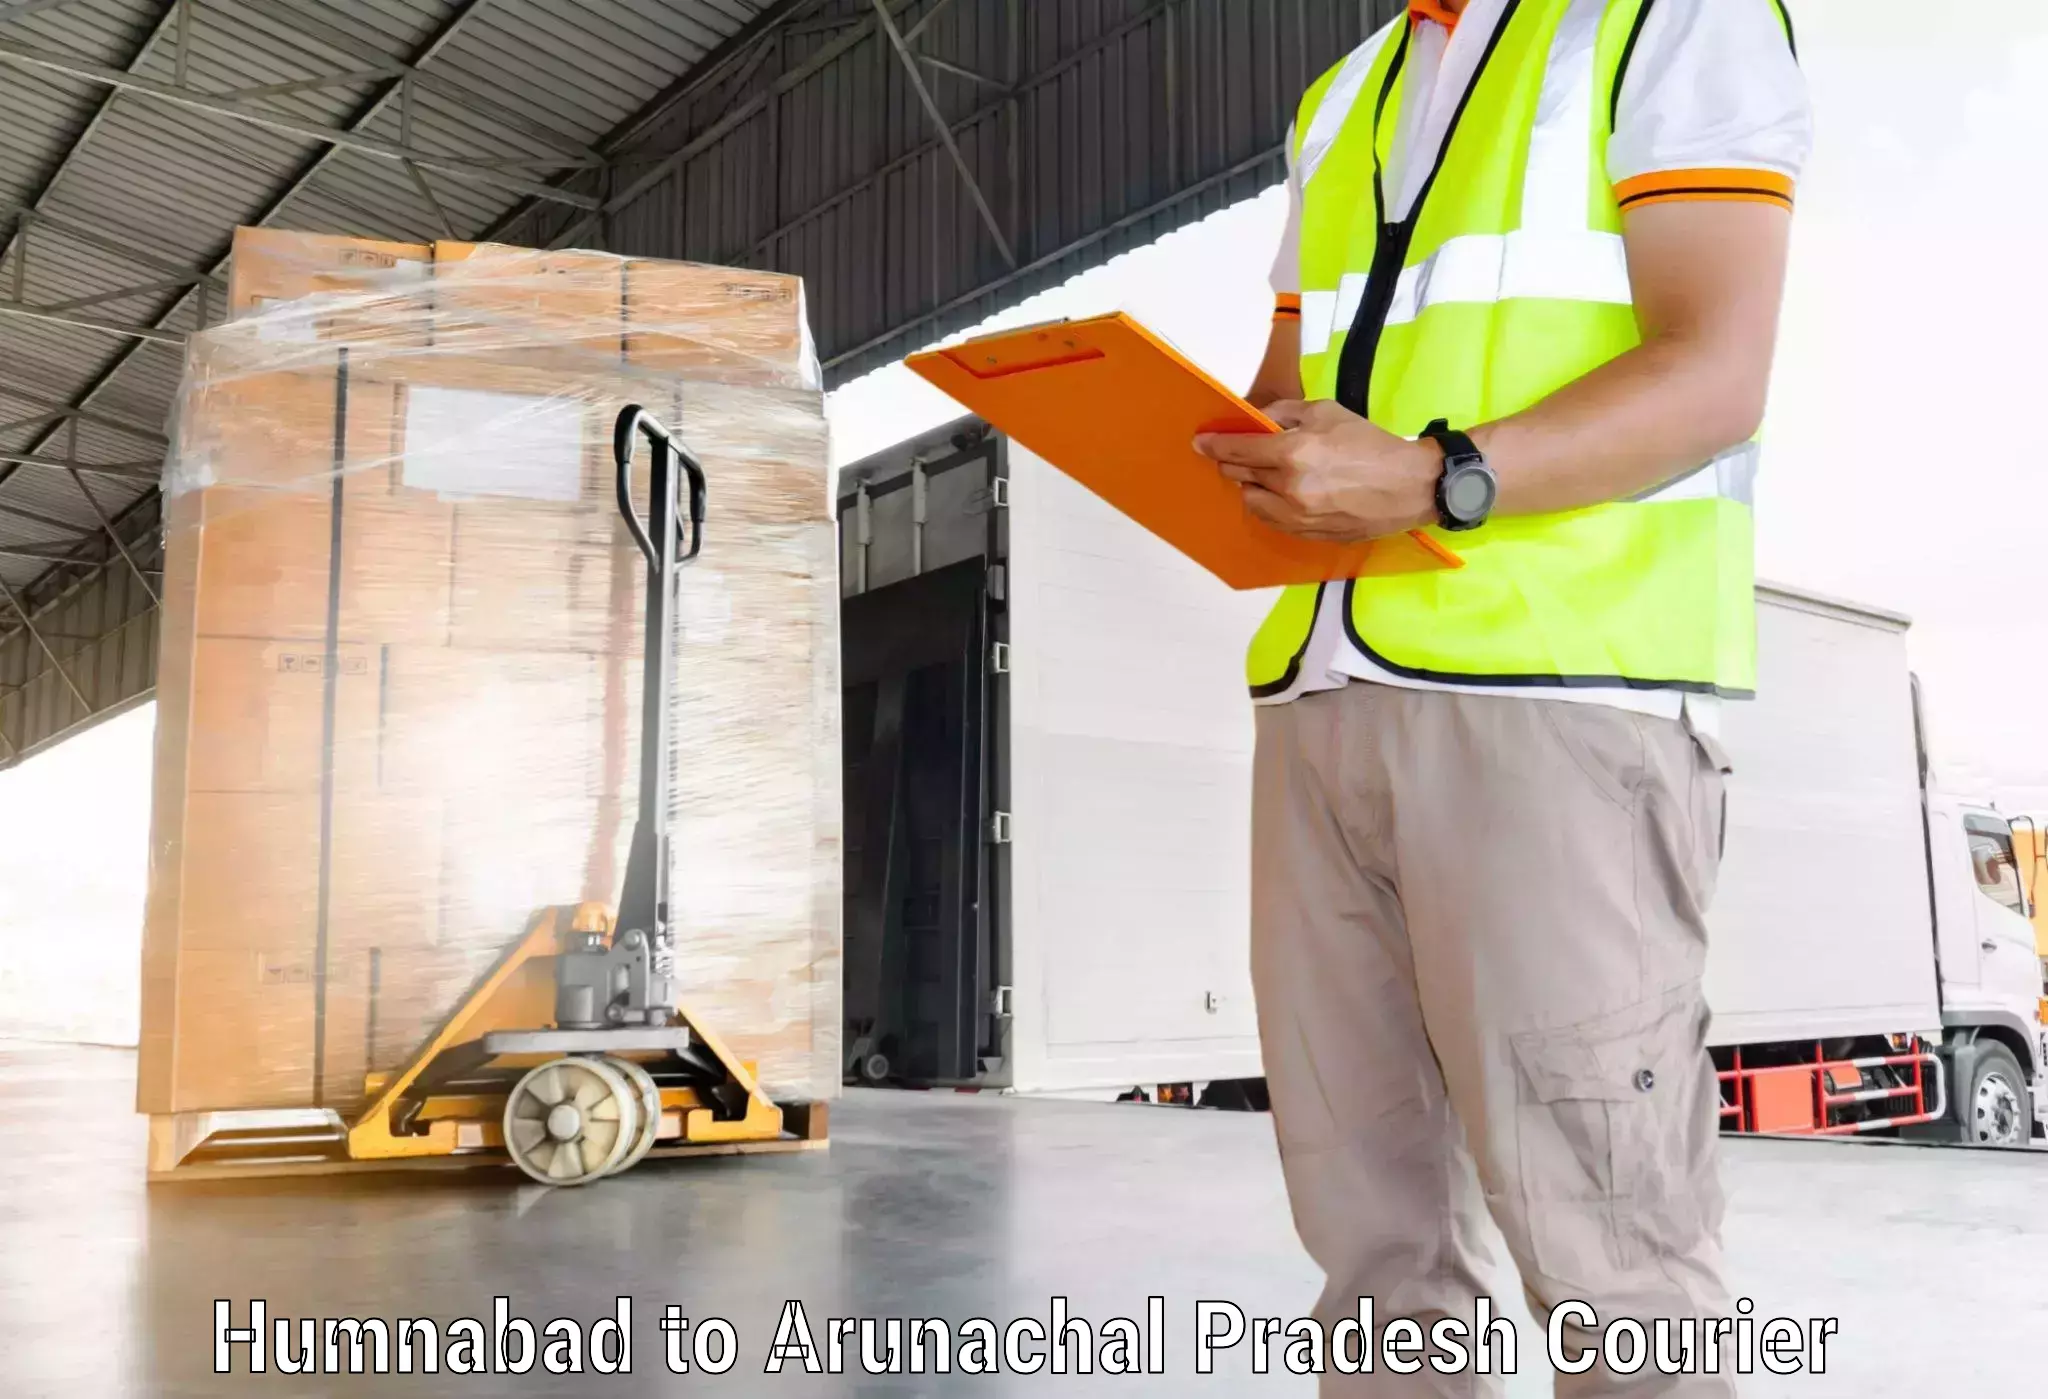 Courier service partnerships Humnabad to Sagalee